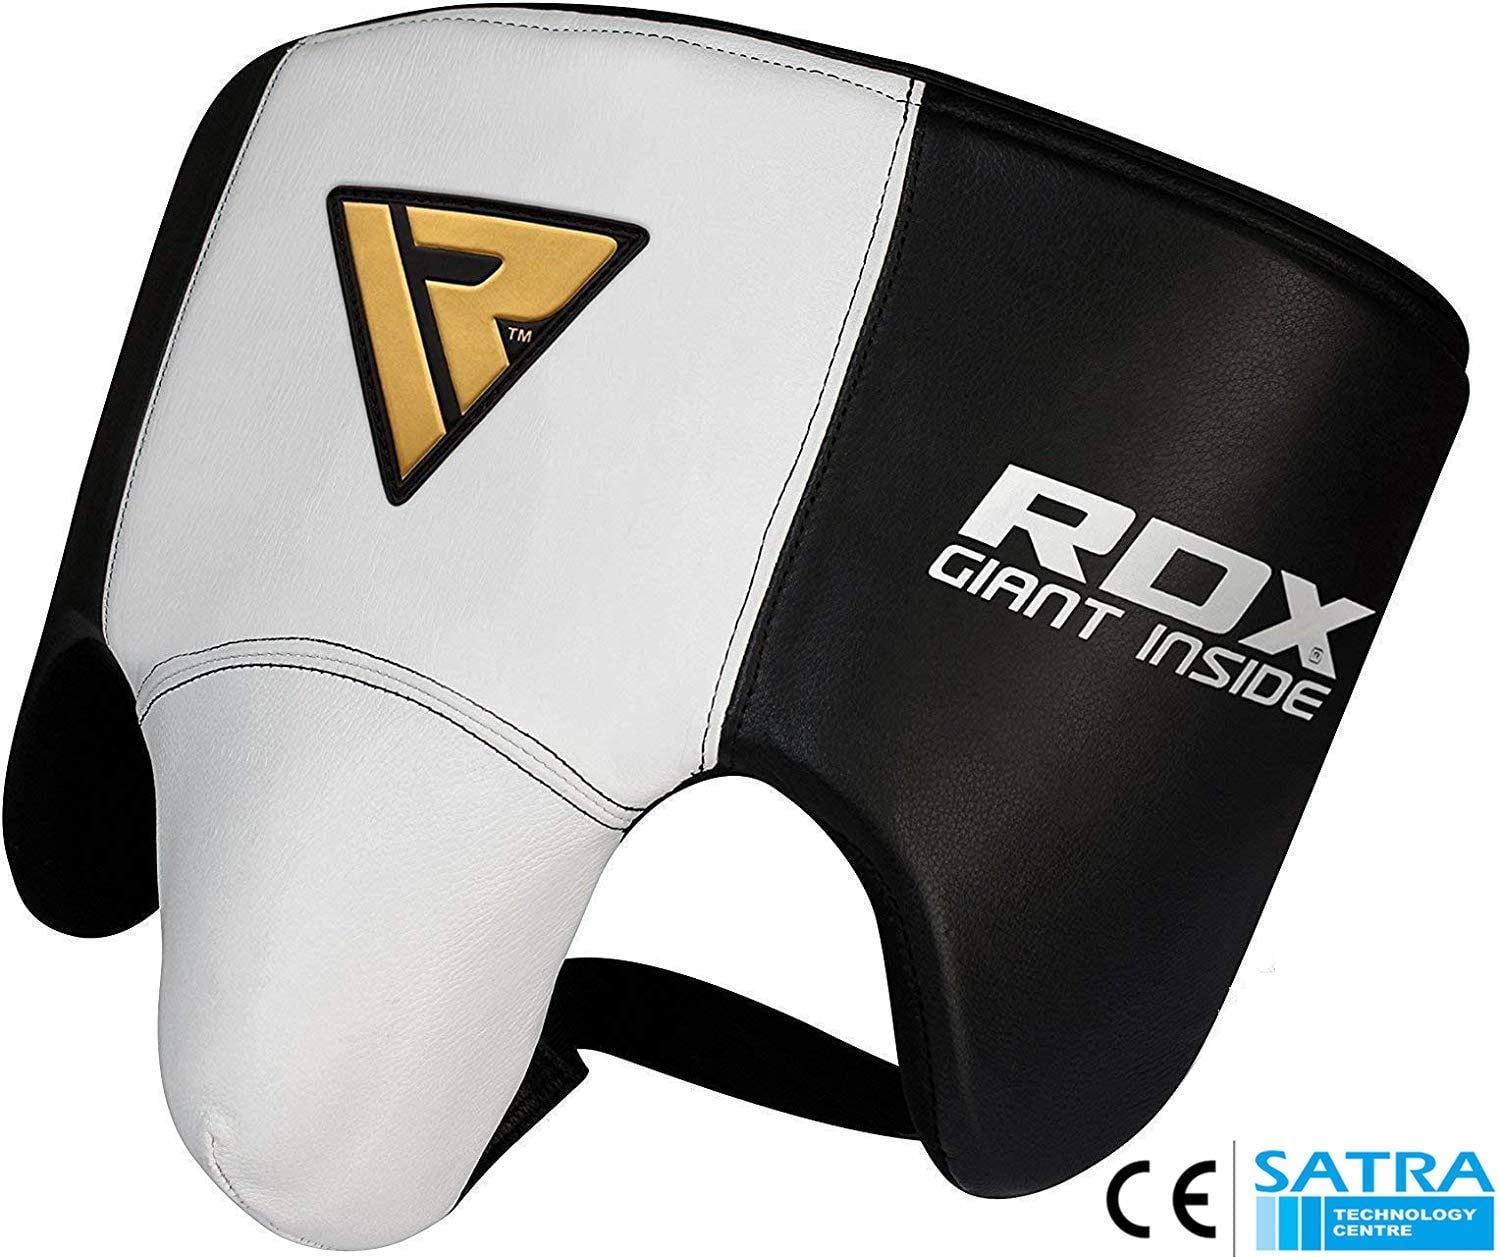 Ringside Boxing Abdominal and Groin Protector